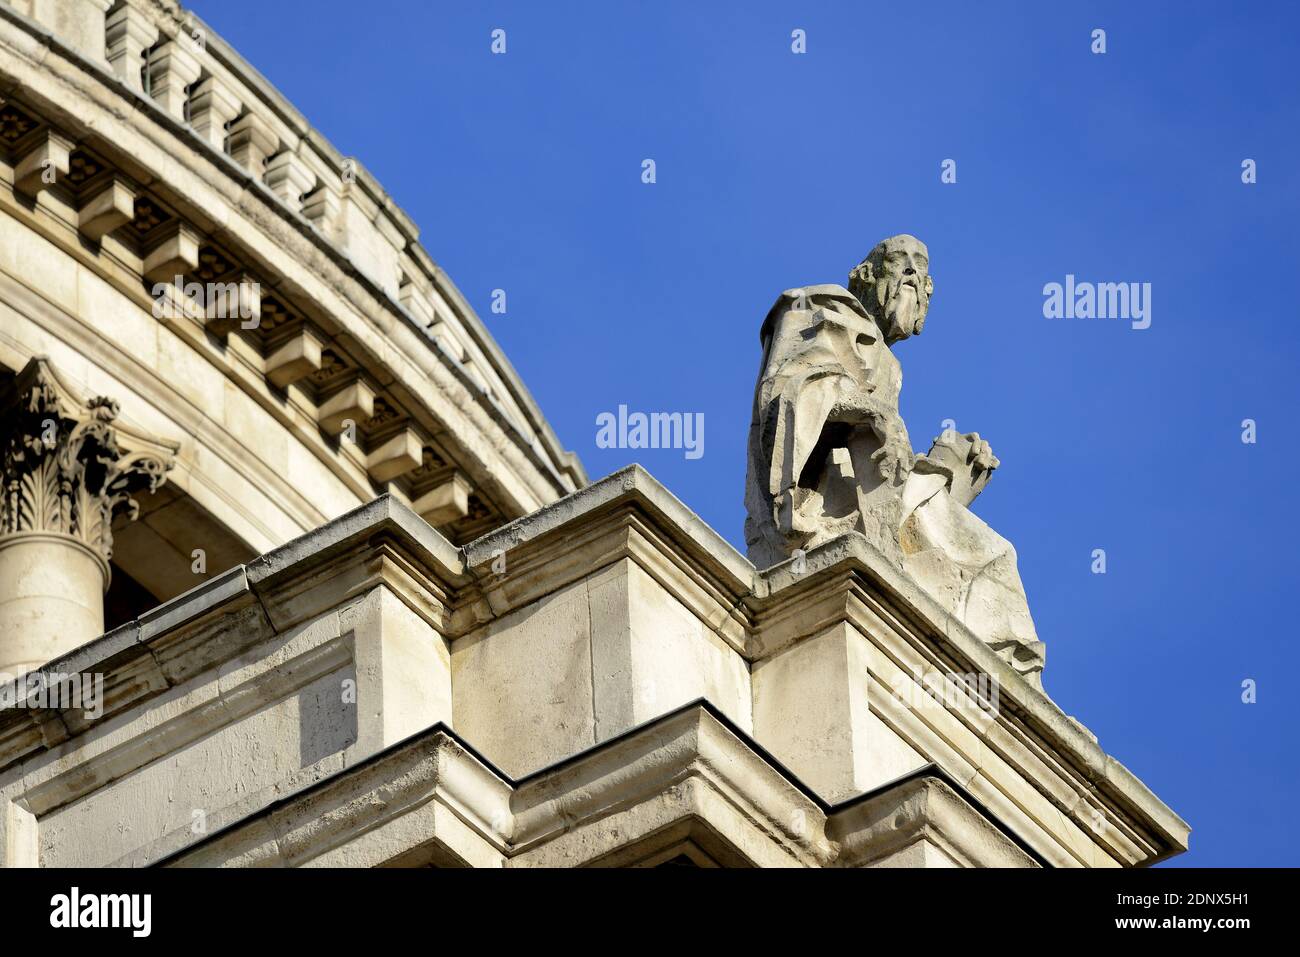 London, England, UK. St Paul's Cathedral. Statue of St. Simon the Zealot / Simon Zelote sitting, with a saw on the south facade Stock Photo